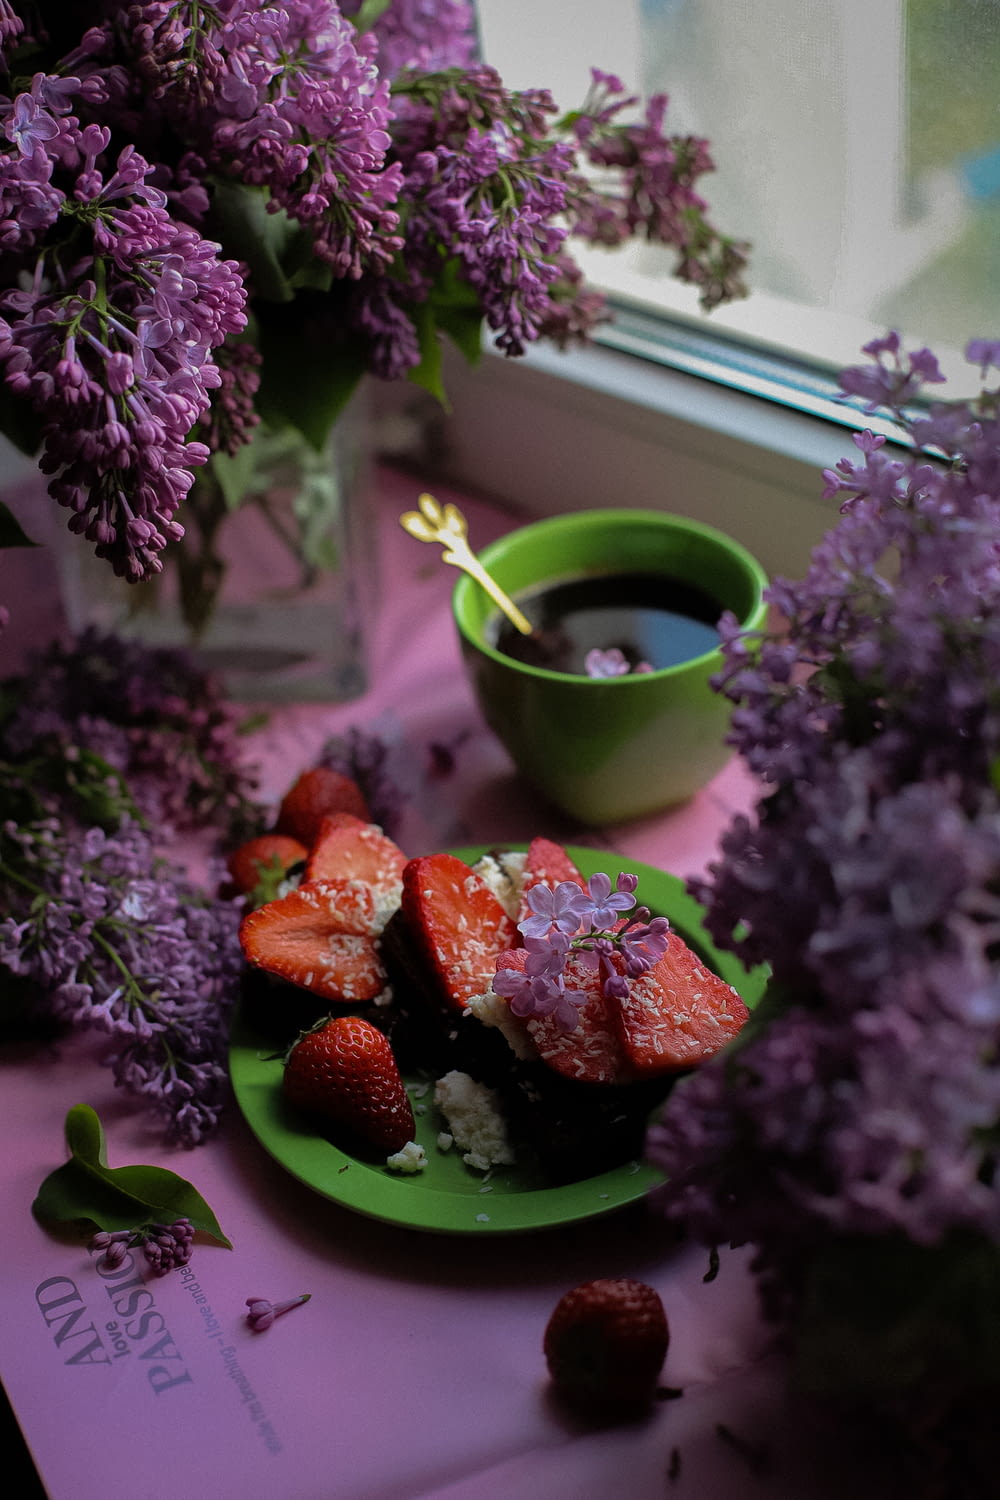 a plate of strawberries next to a cup of coffee